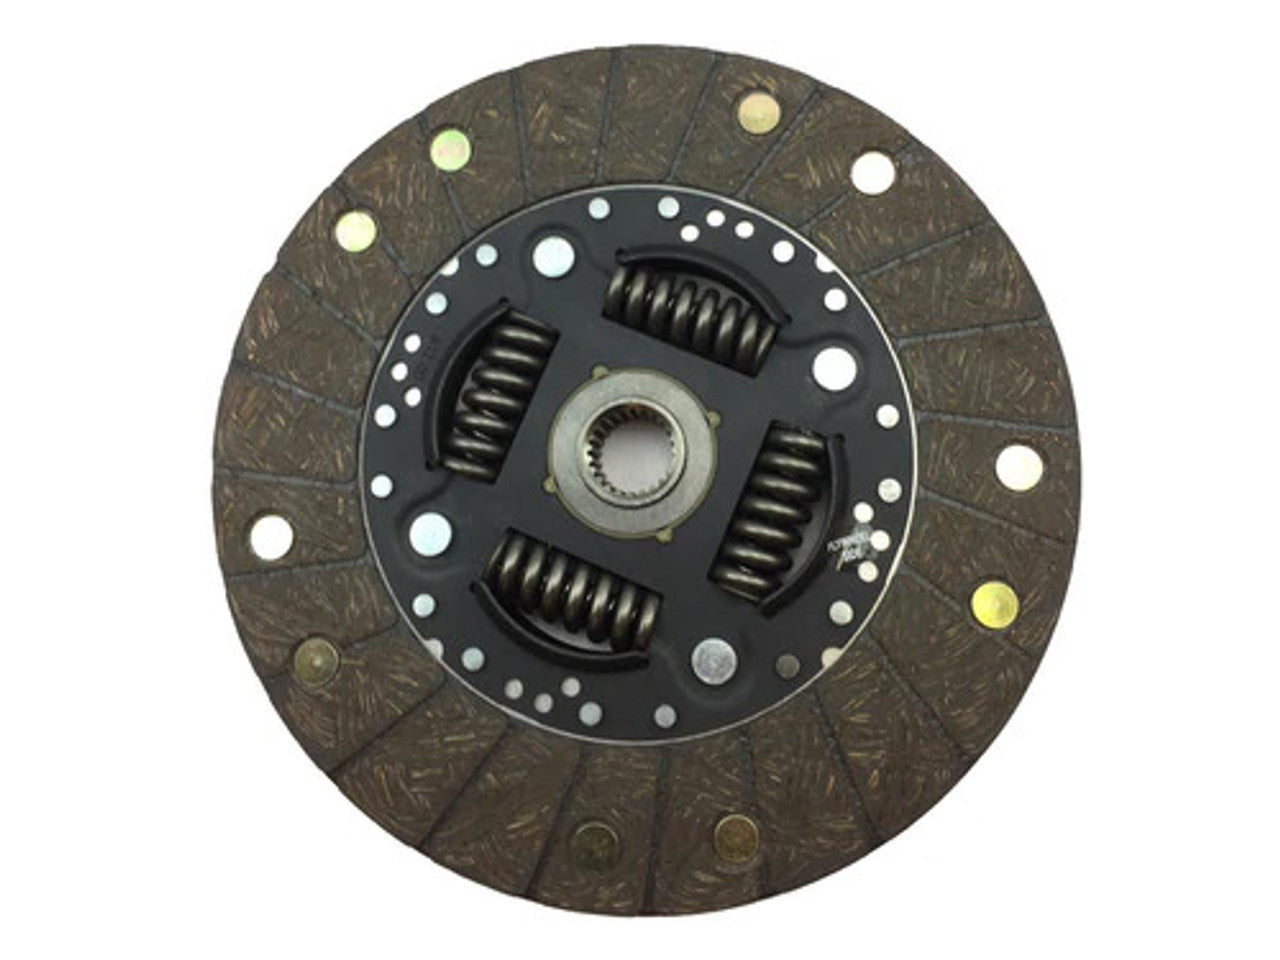 RTS Performance Clutch – Twin-Friction Clutch Kit for 2.0TSI – EA888 Gen1/2